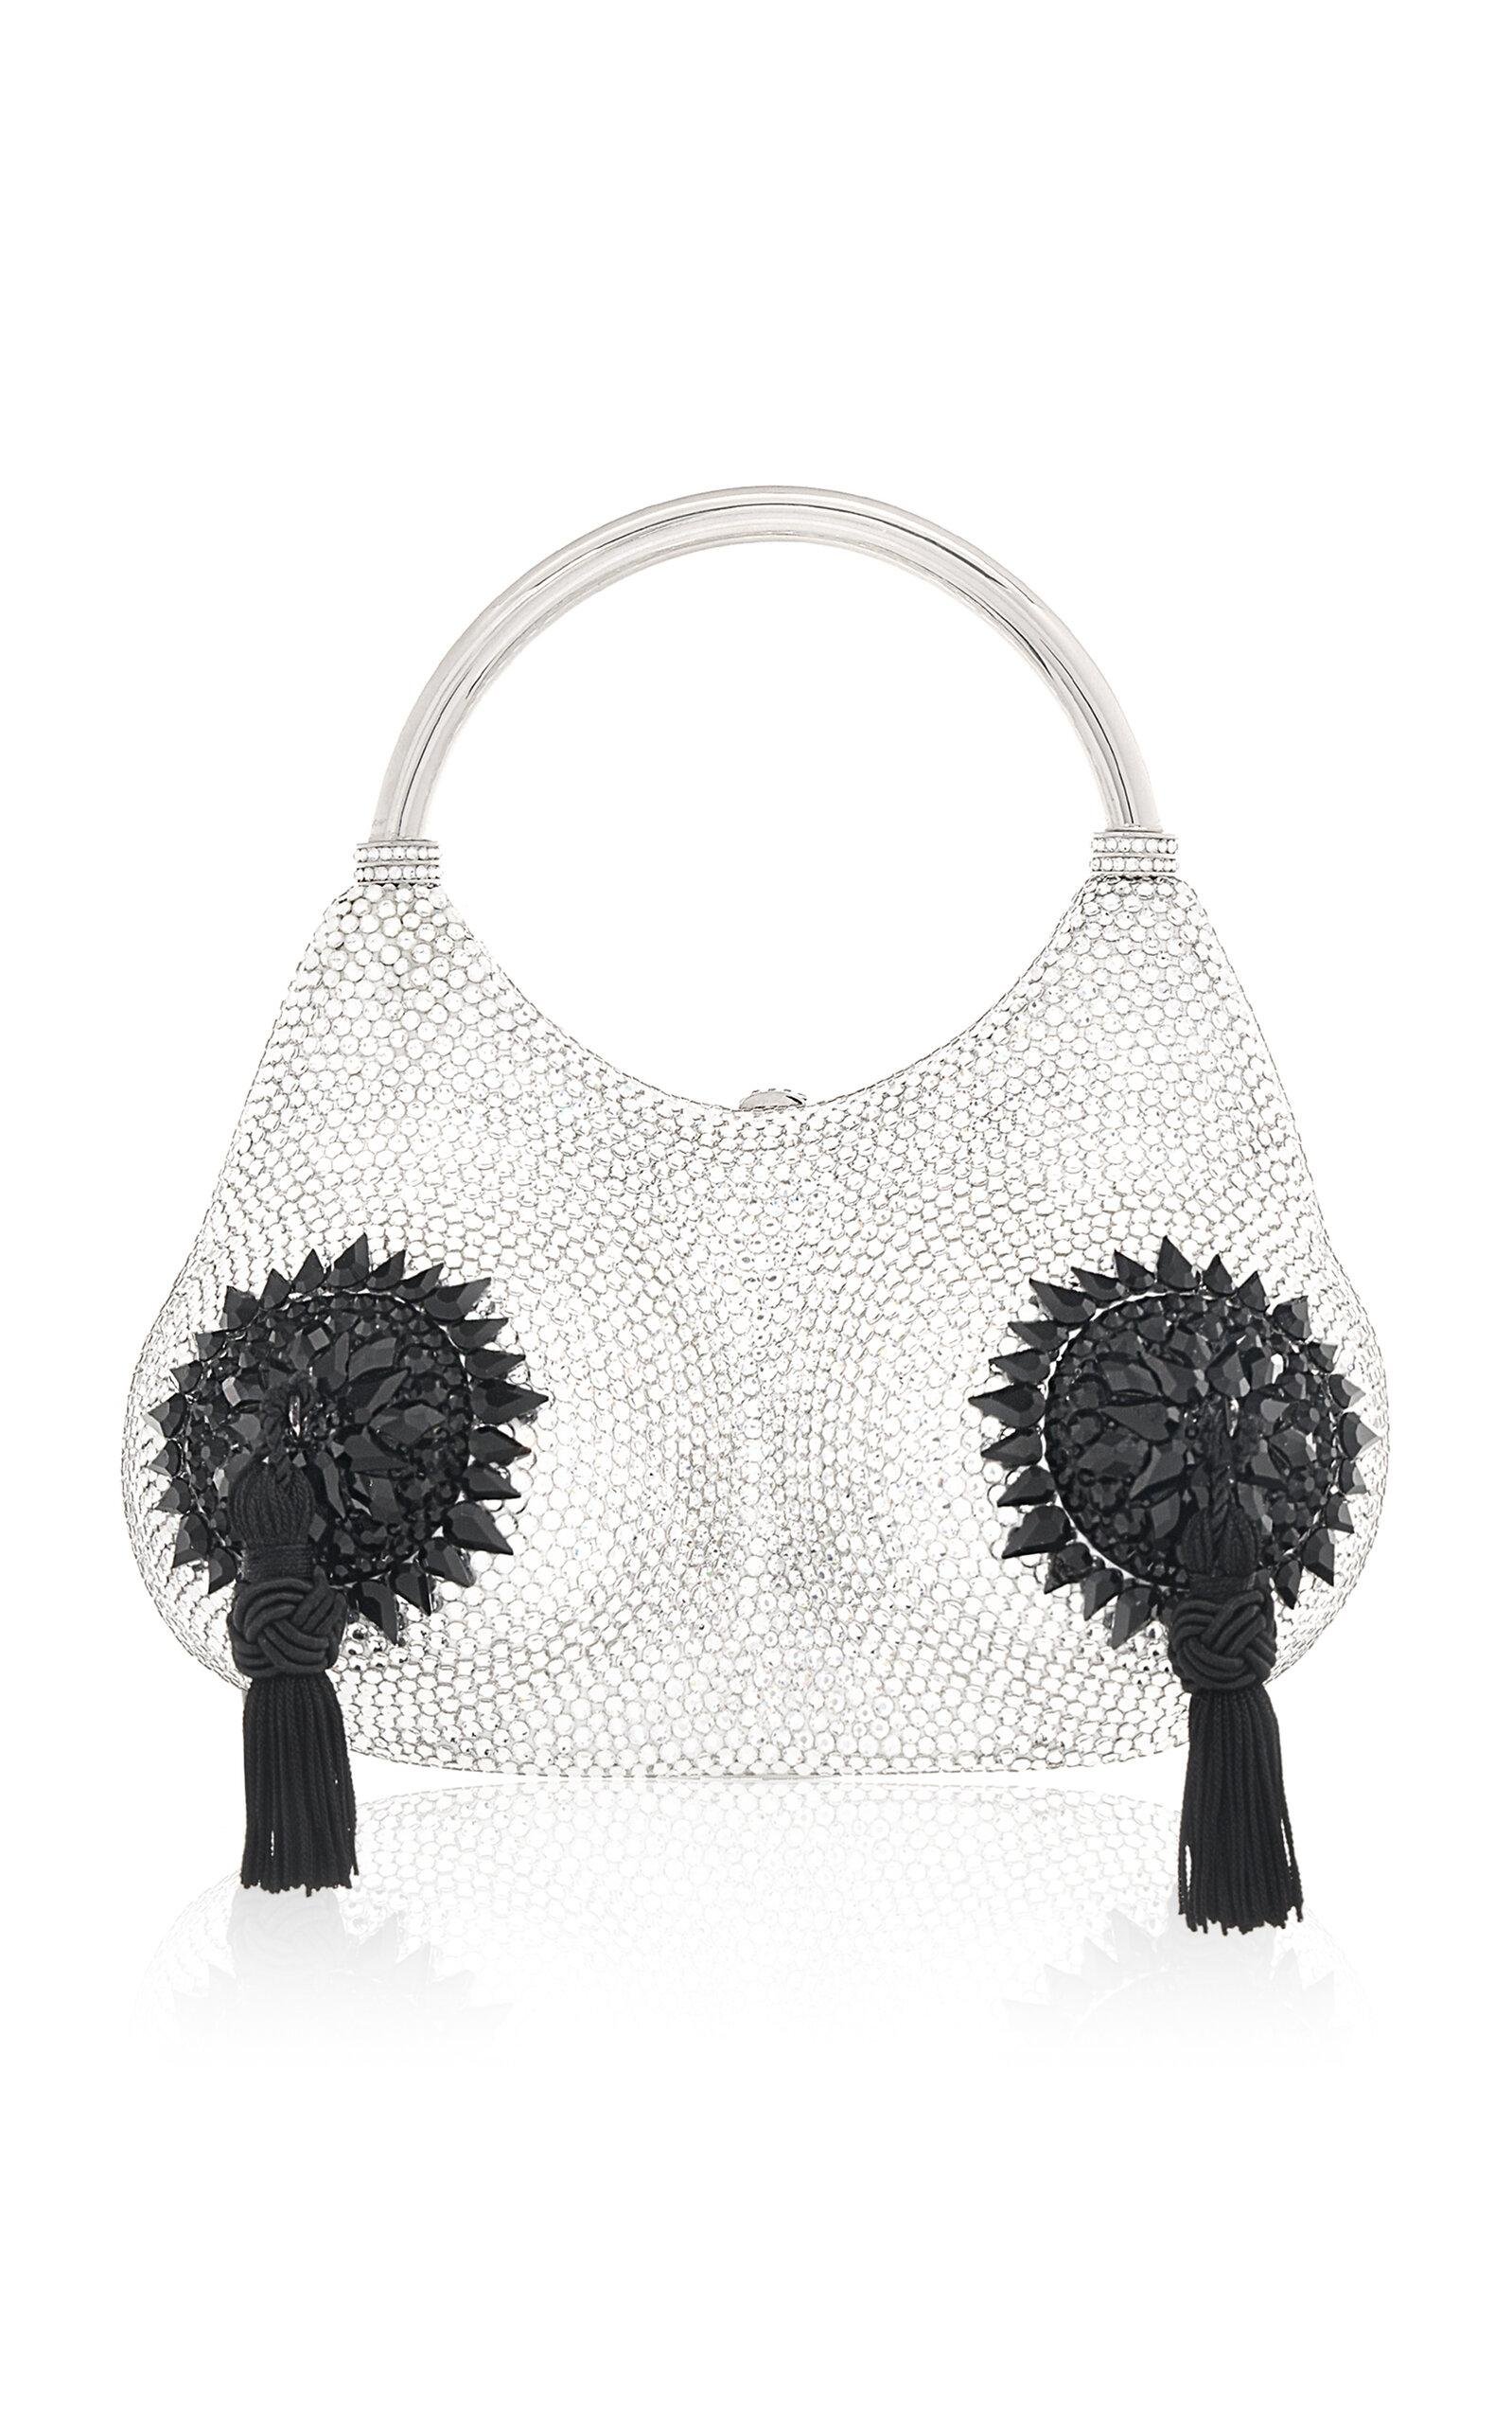 Judith Leiber Couture - Pasties Bust Crystal Clutch - Silver - OS - Only At Moda Operandi by JUDITH LEIBER COUTURE